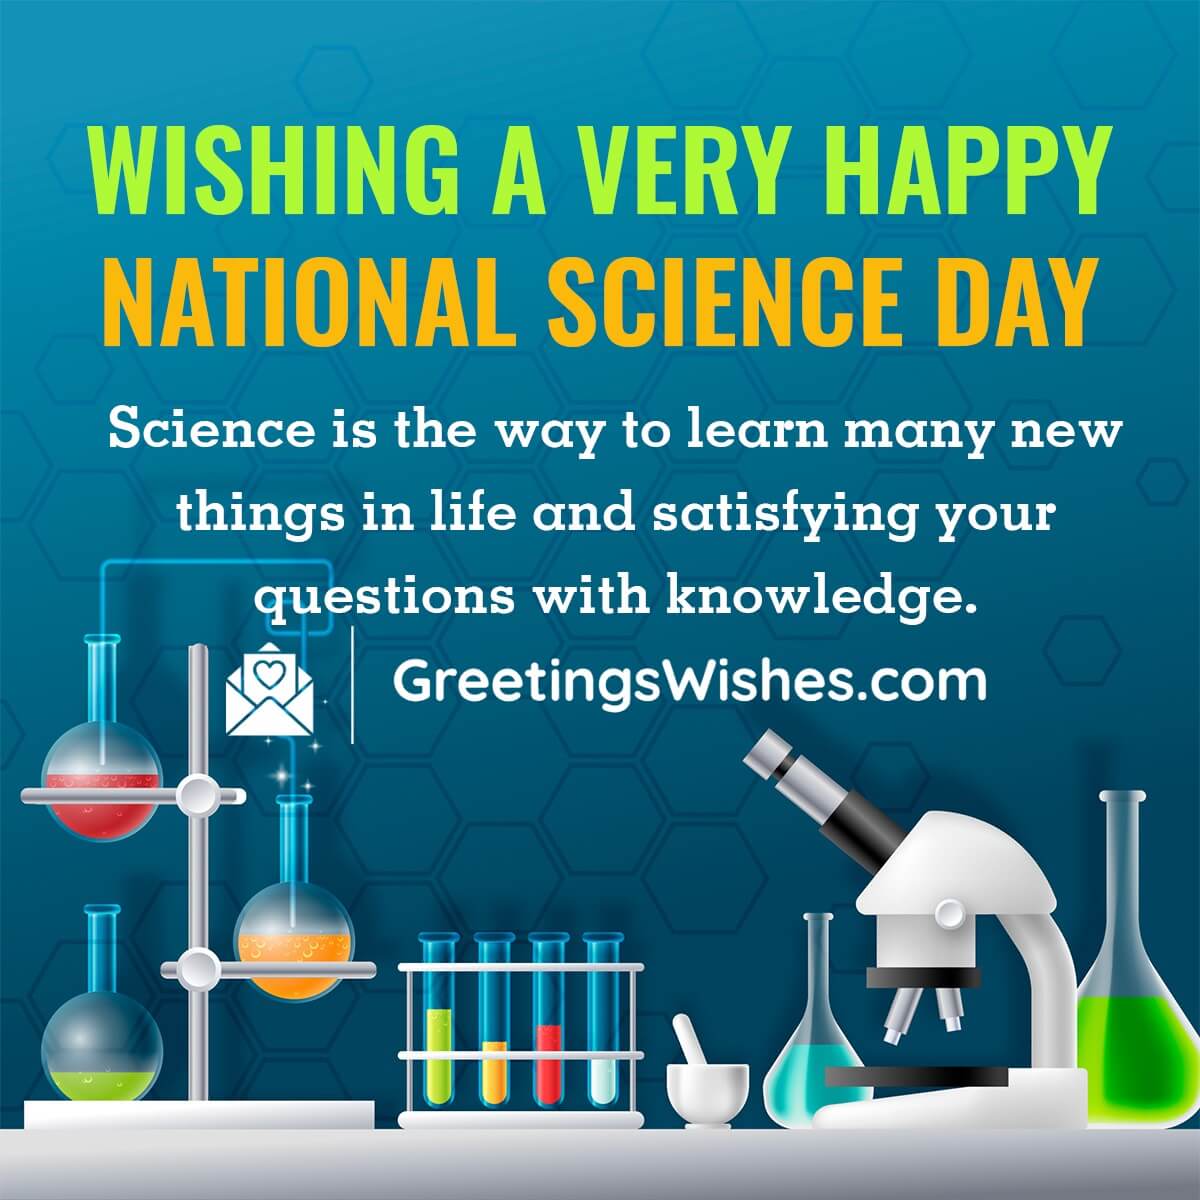 Wishing A Very Happy National Science Day